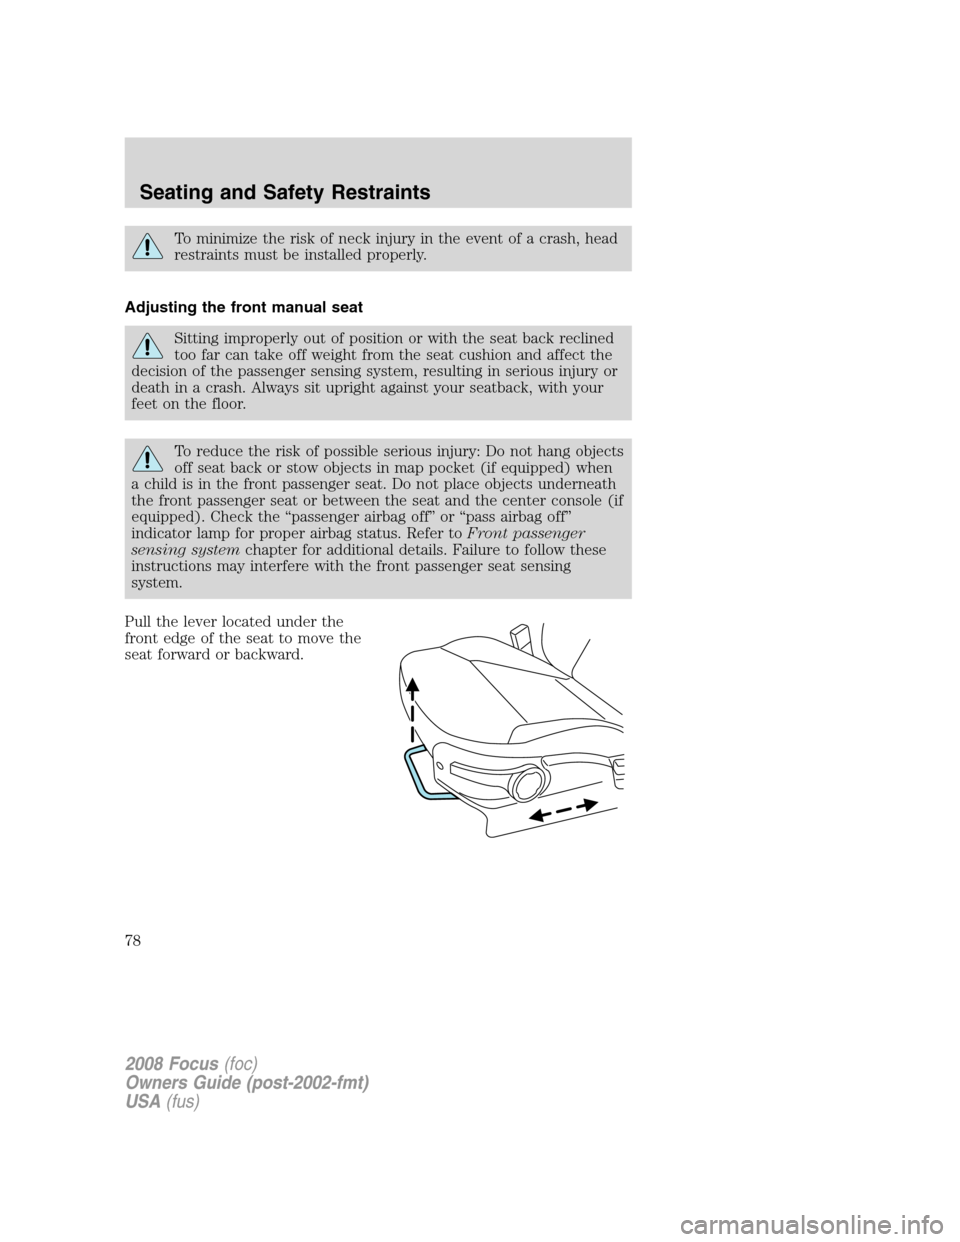 FORD FOCUS 2008 2.G Owners Manual To minimize the risk of neck injury in the event of a crash, head
restraints must be installed properly.
Adjusting the front manual seat
Sitting improperly out of position or with the seat back reclin